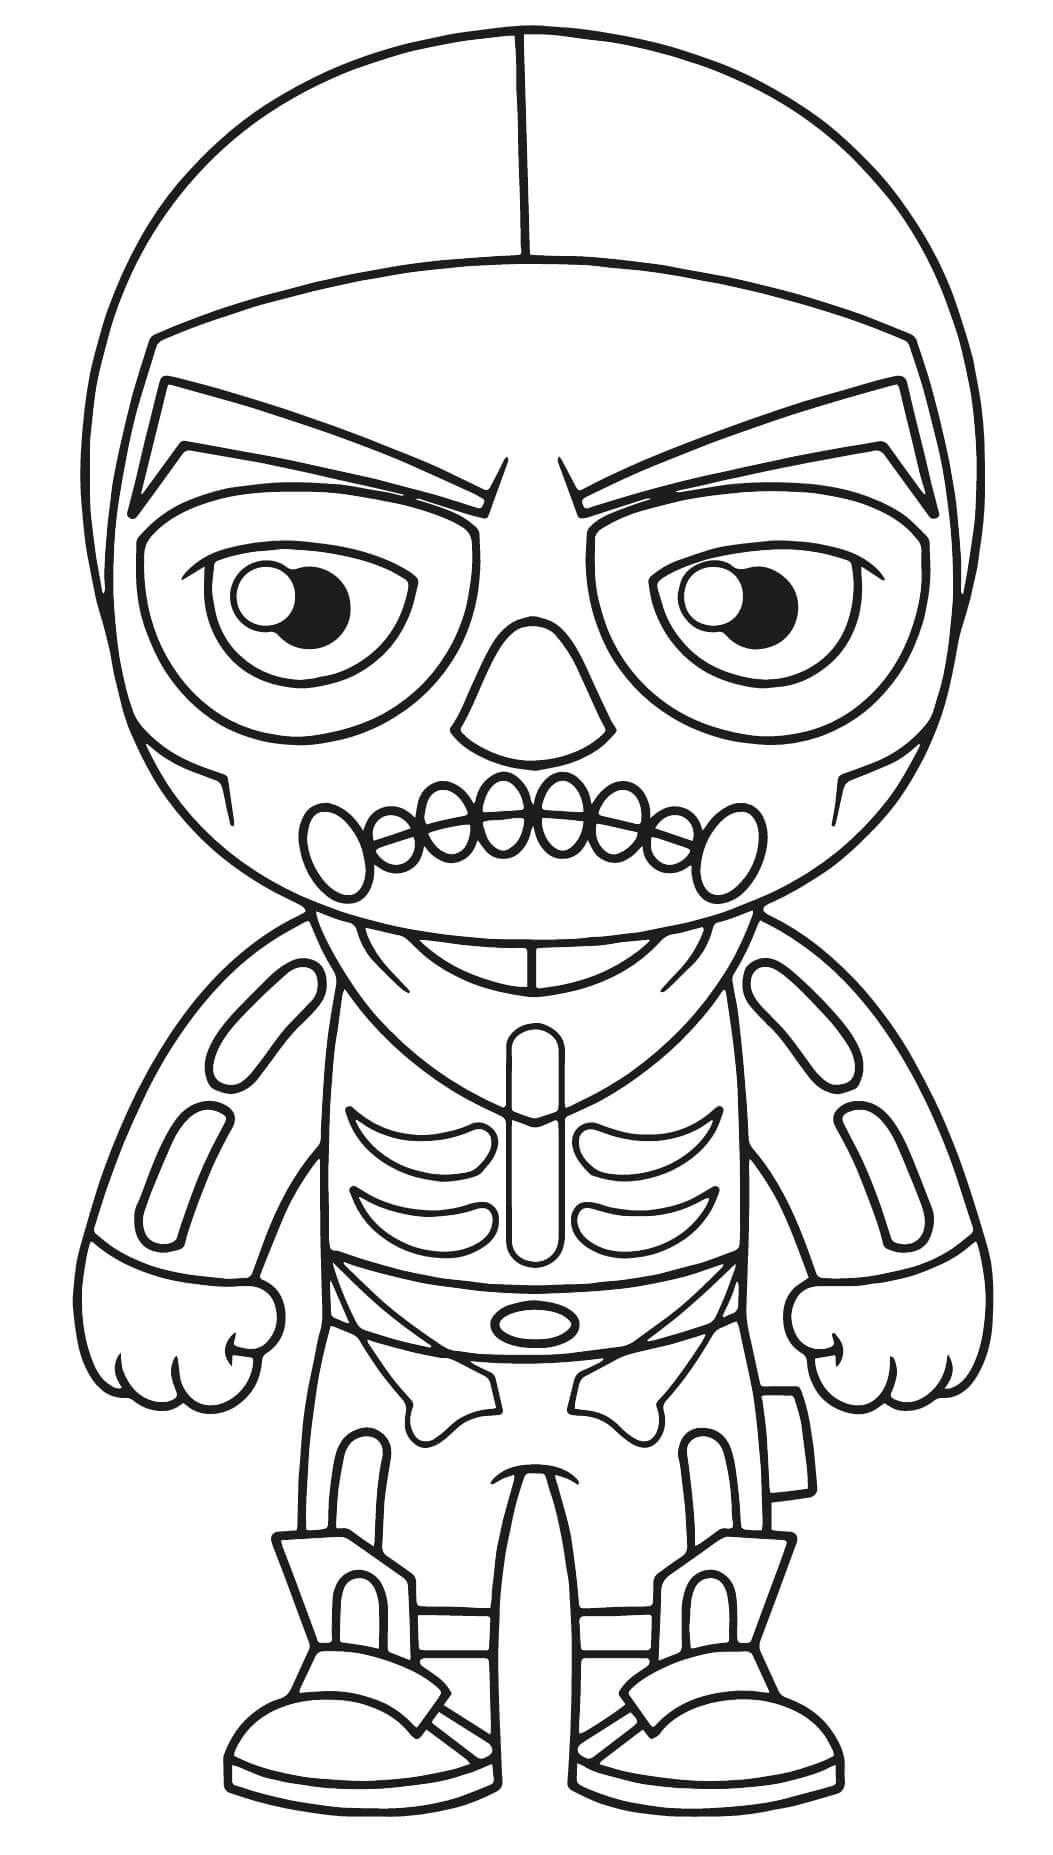 Skull Ranger Coloring Page